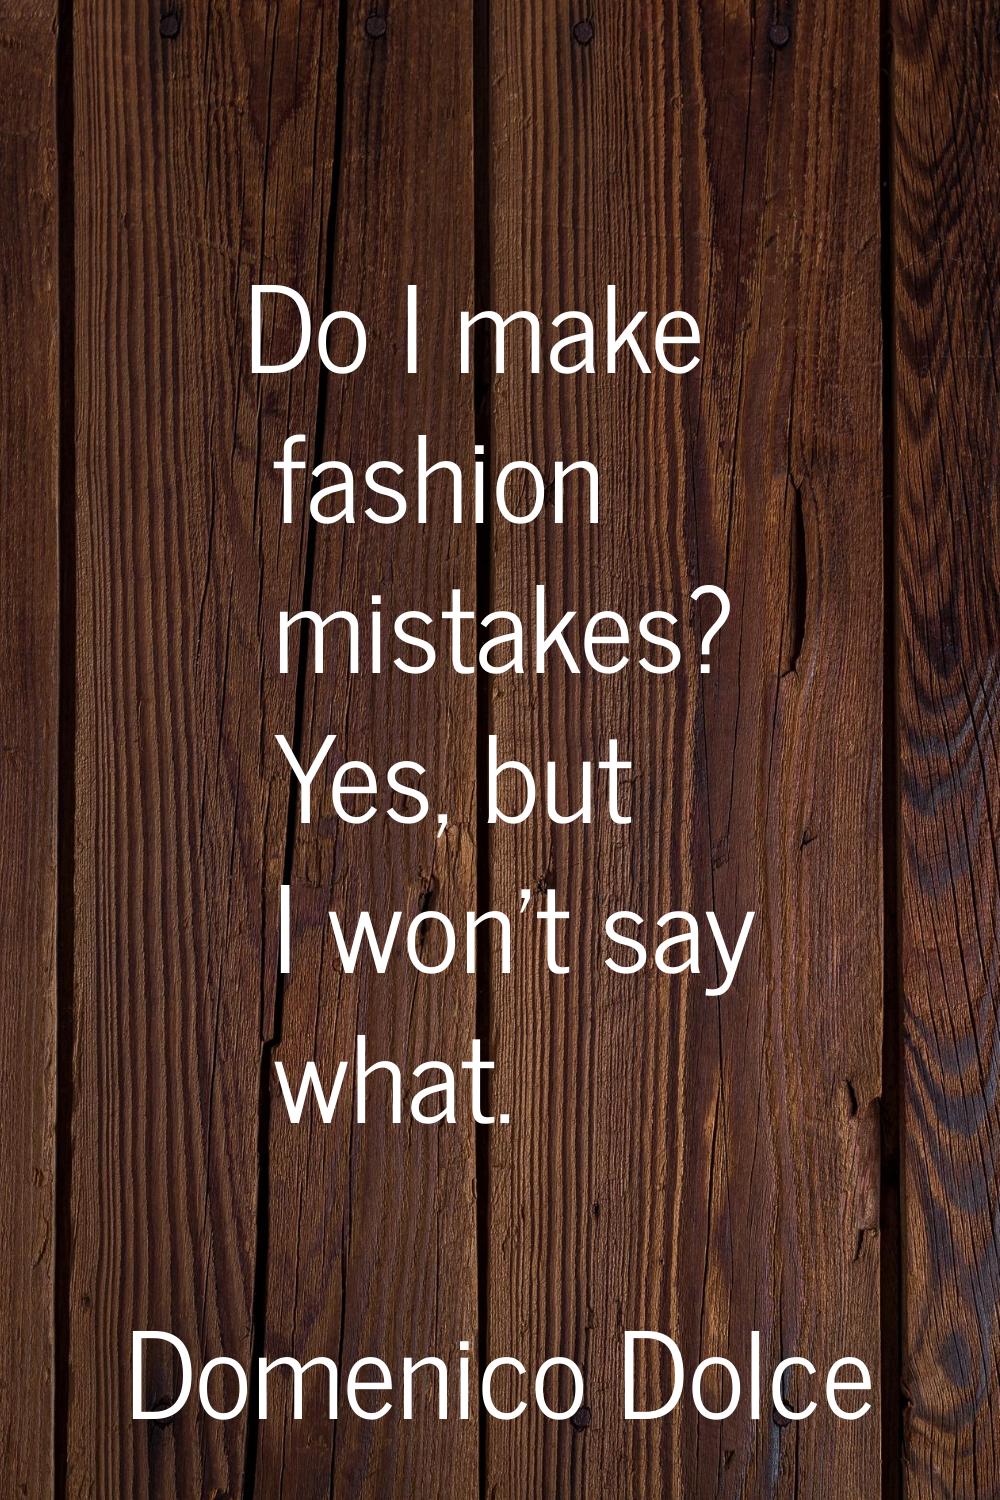 Do I make fashion mistakes? Yes, but I won't say what.